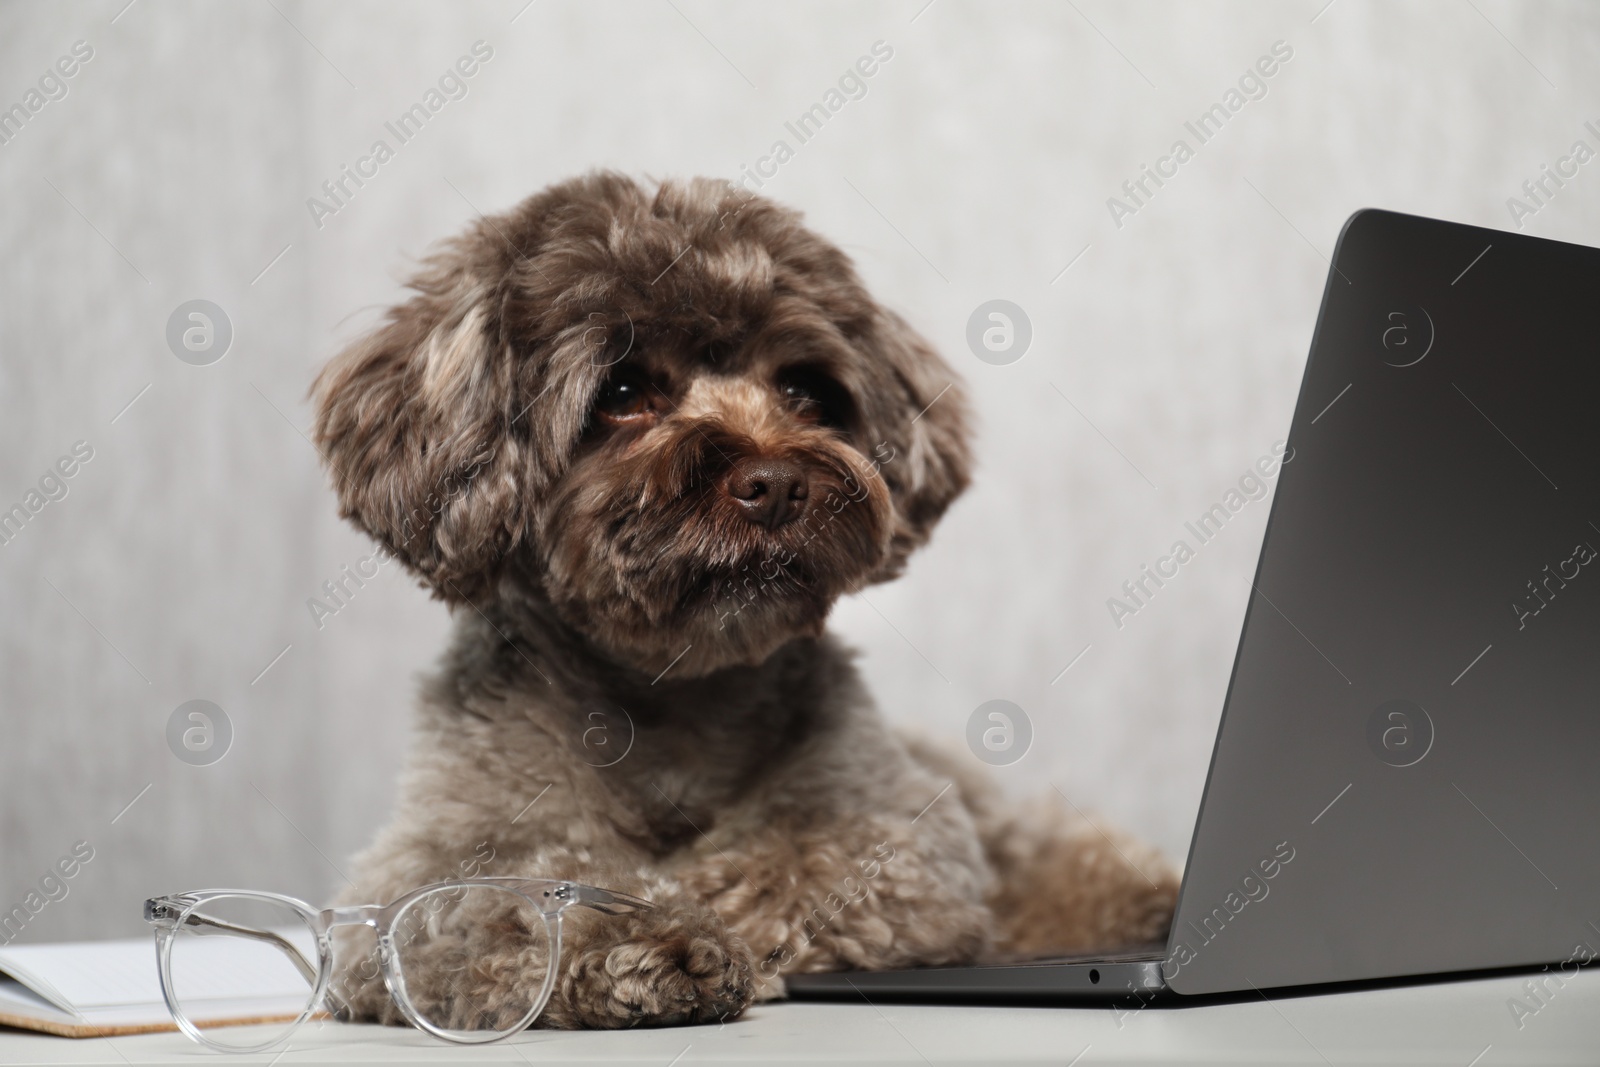 Photo of Cute Maltipoo dog on desk with laptop and glasses indoors